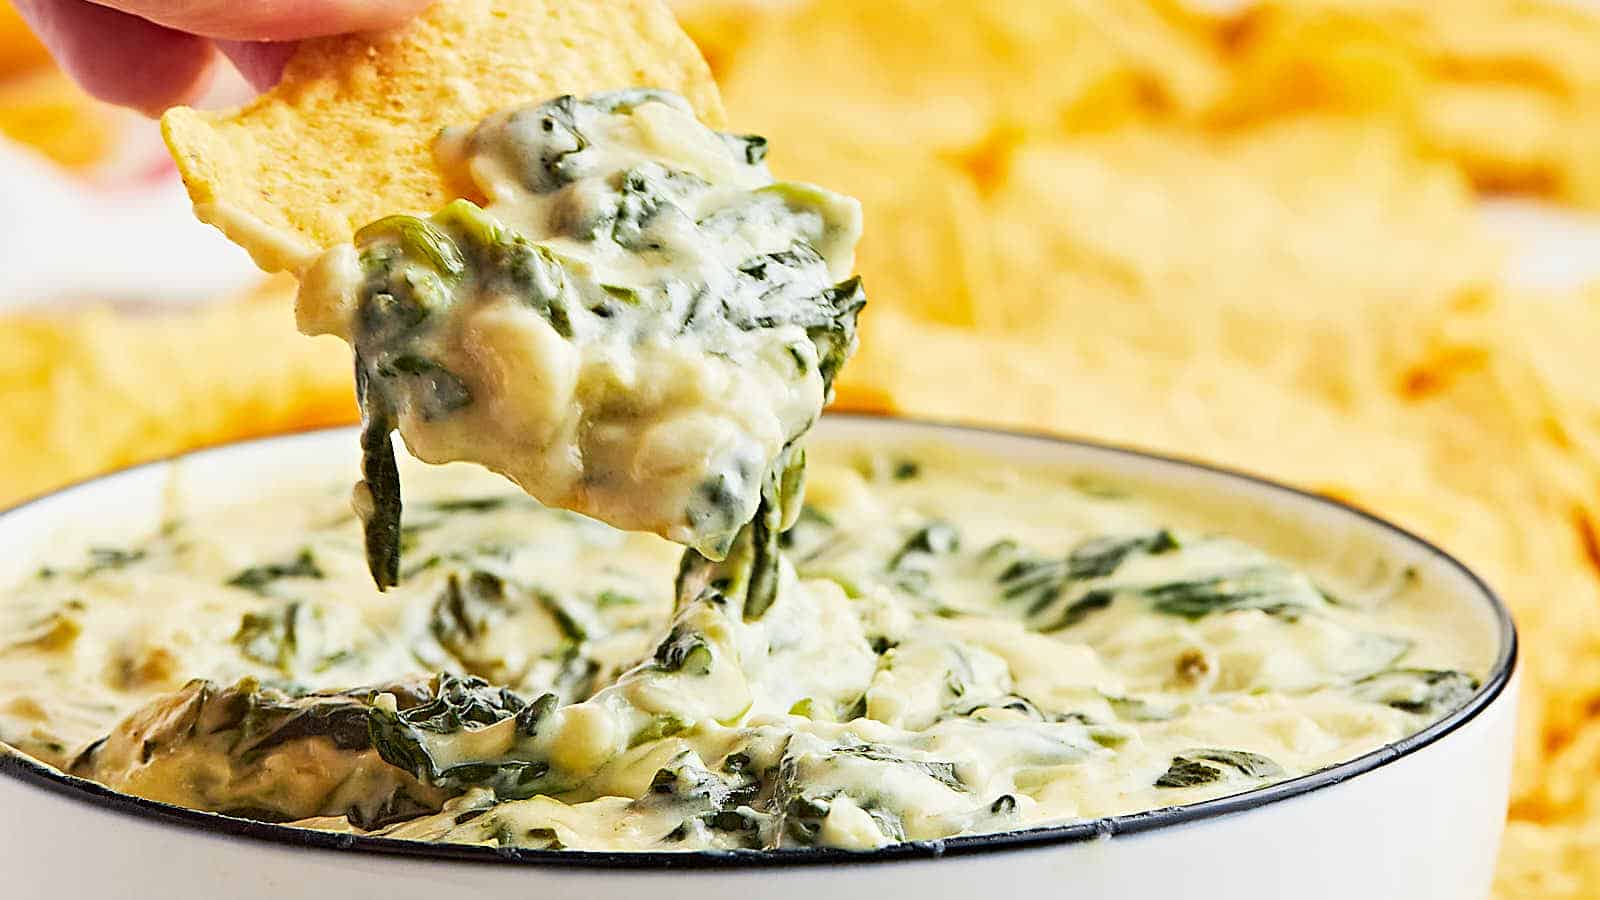 A person dipping a tortilla chip into a bowl of spinach dip.